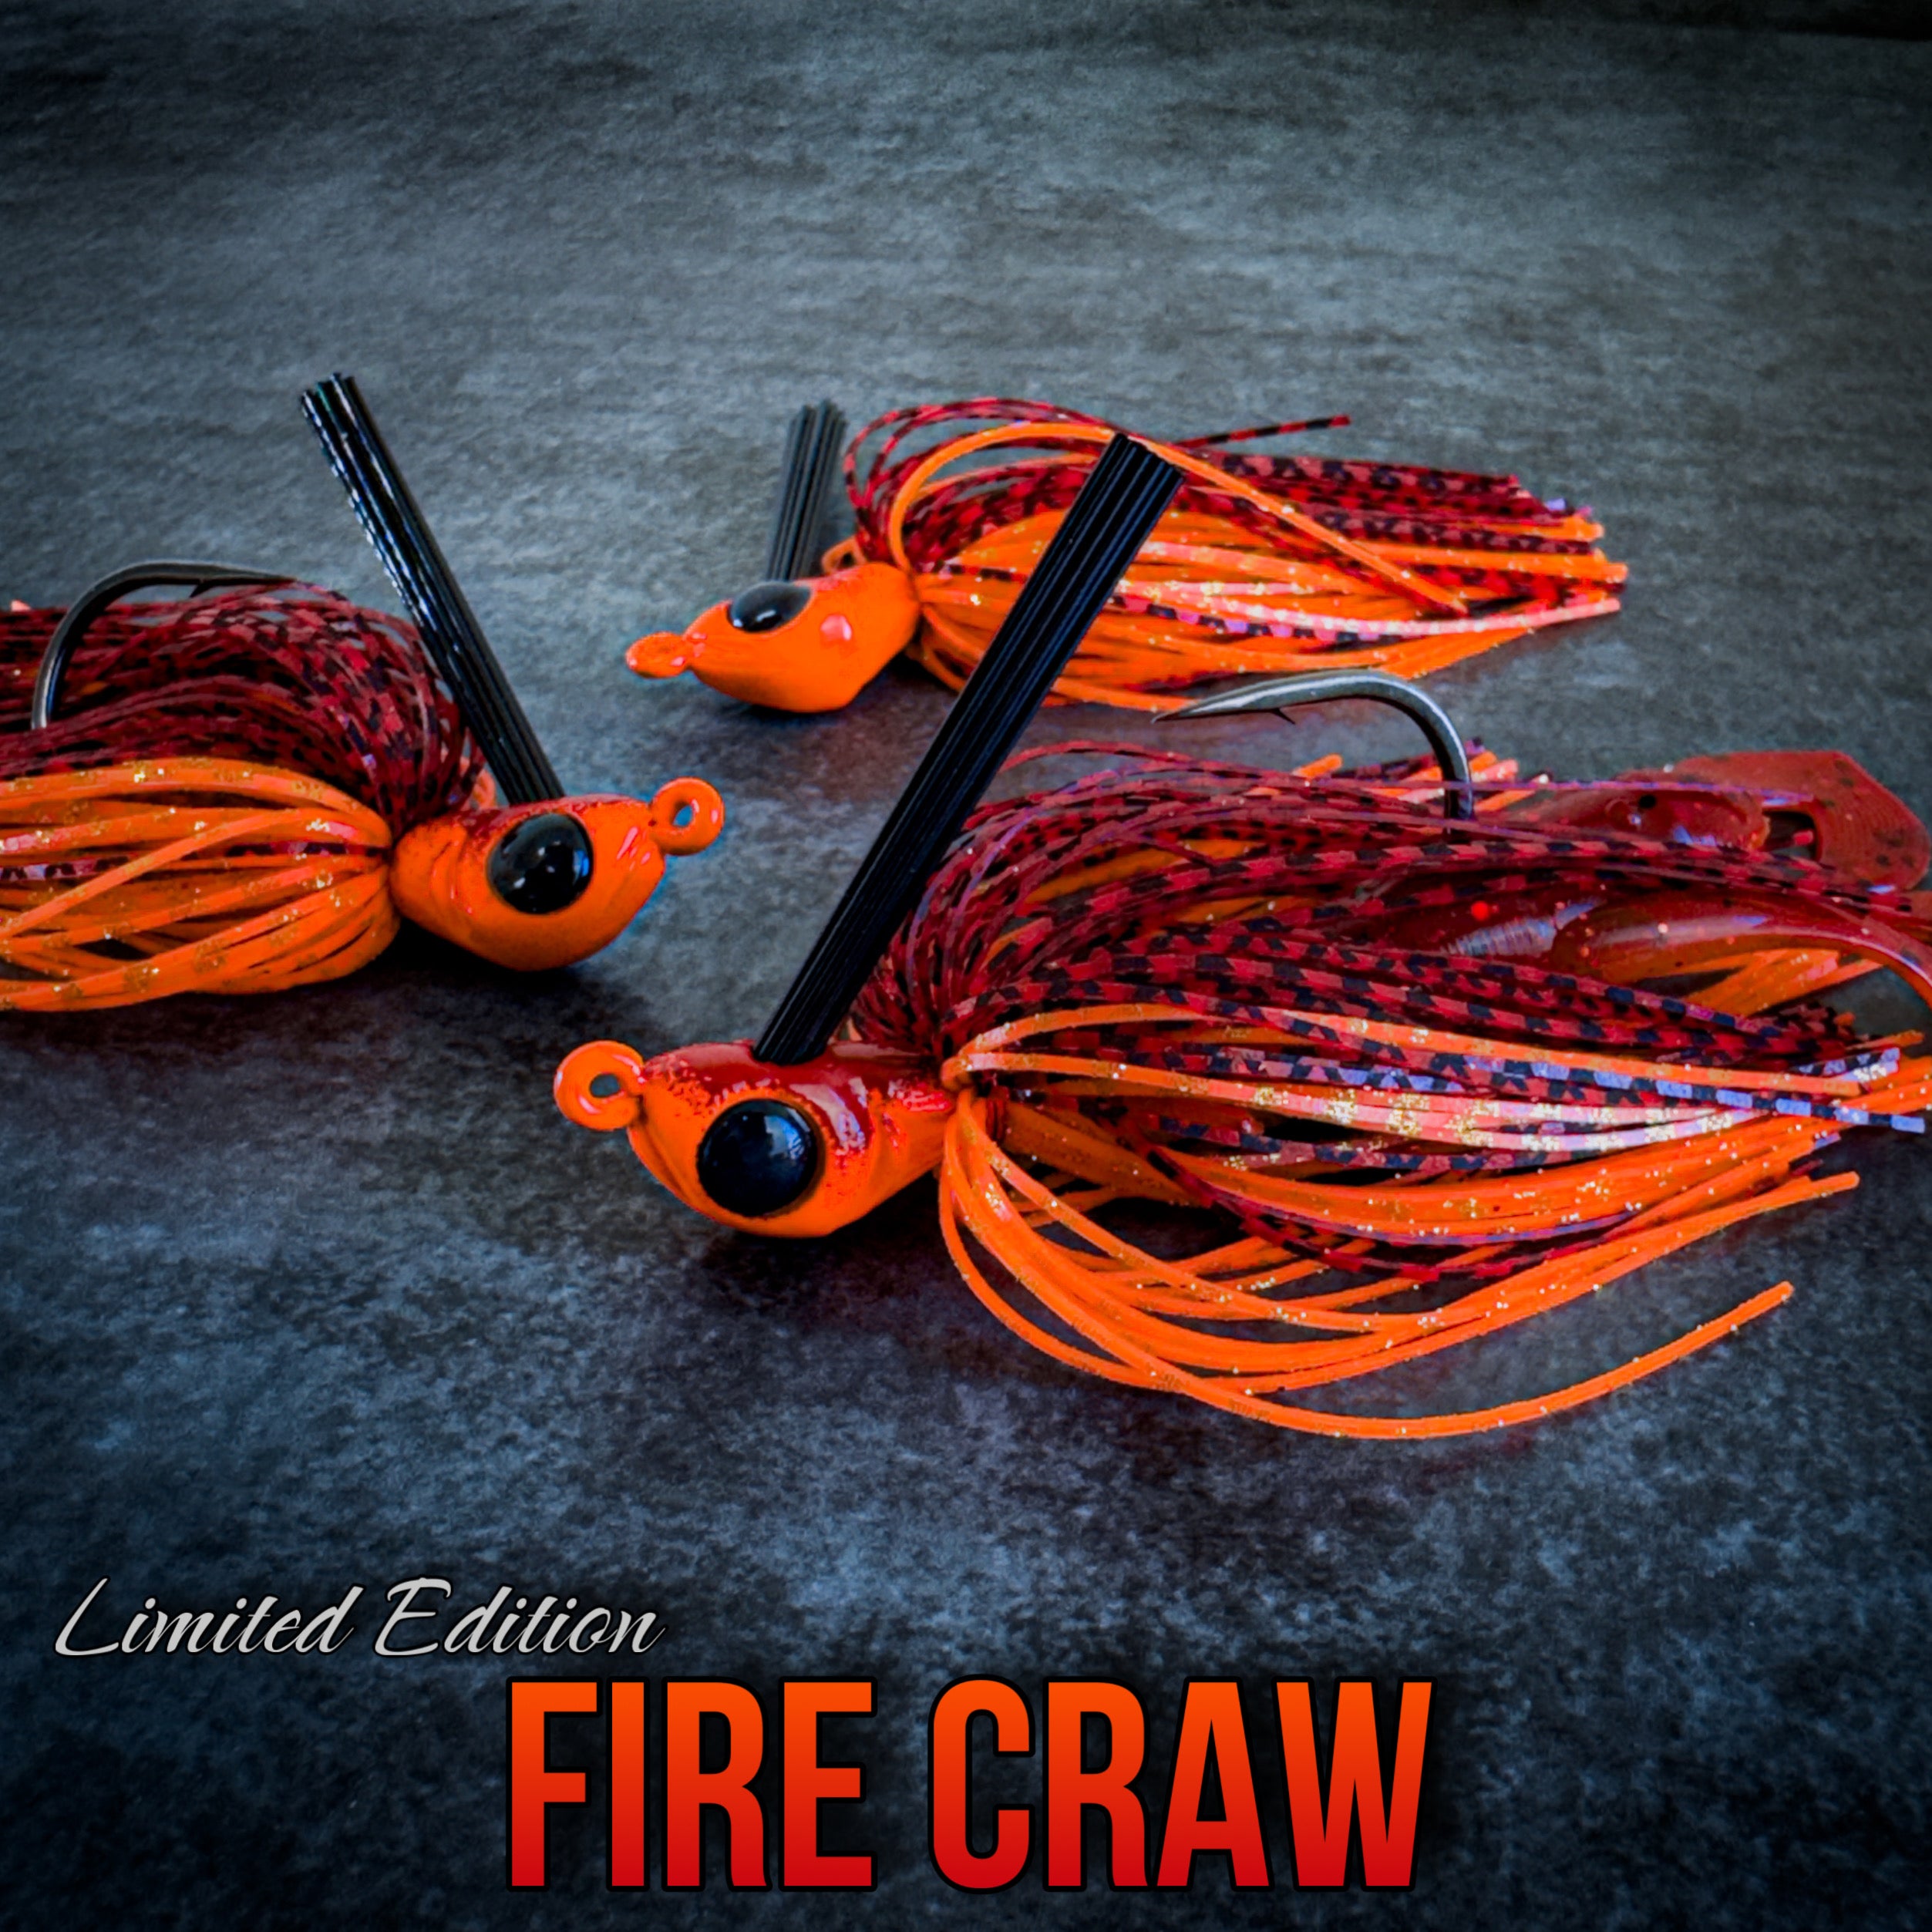 Exclusive Fire Craw Swim Jigs —Made to order please allow 1 week to ship